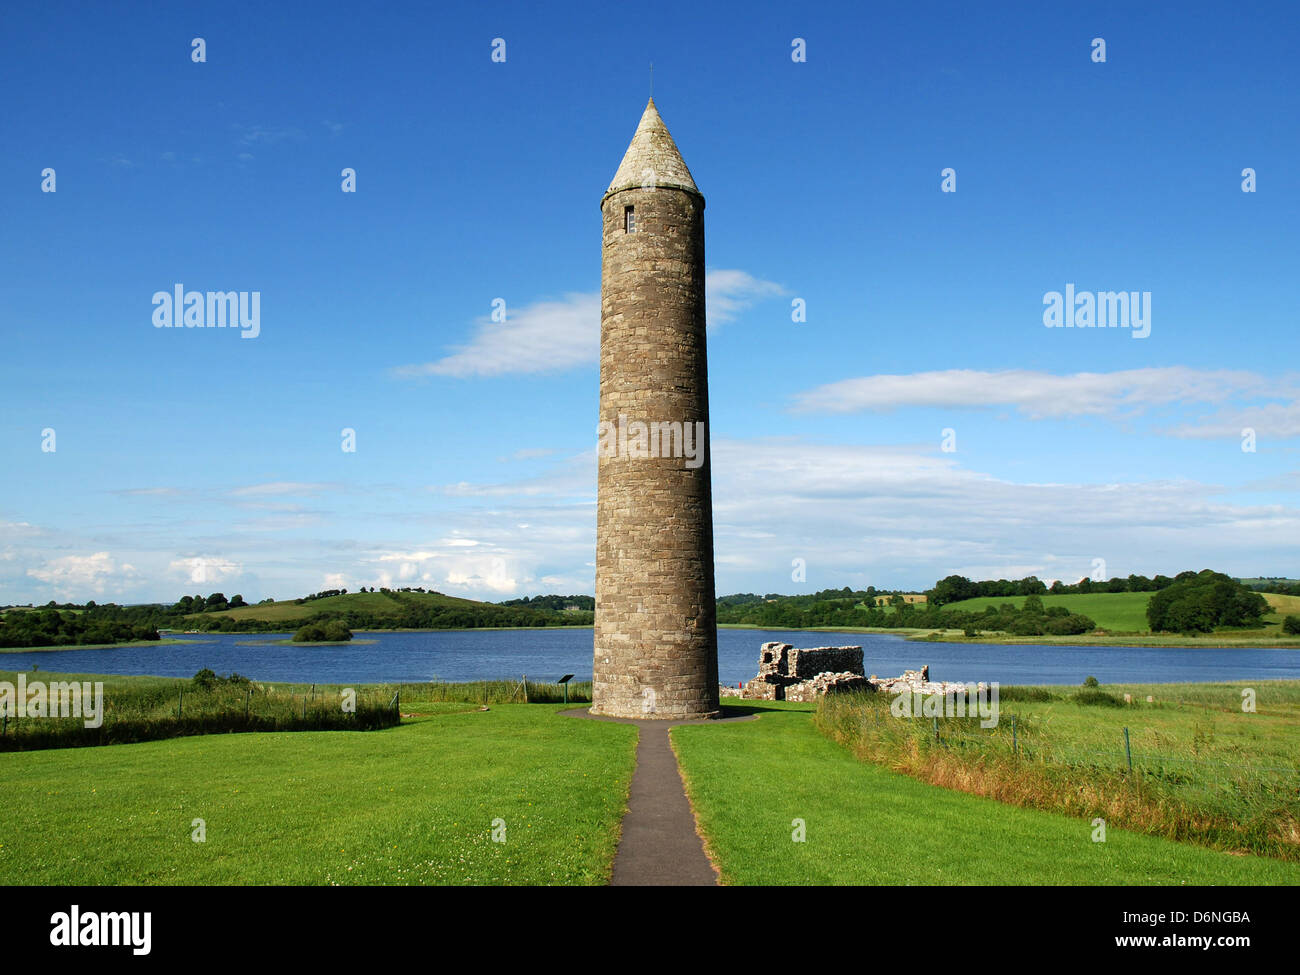 Devenish Island, Monastic Site, Round Tower, Lower Lough Erne, Northern Ireland, County Fermanagh Stock Photo